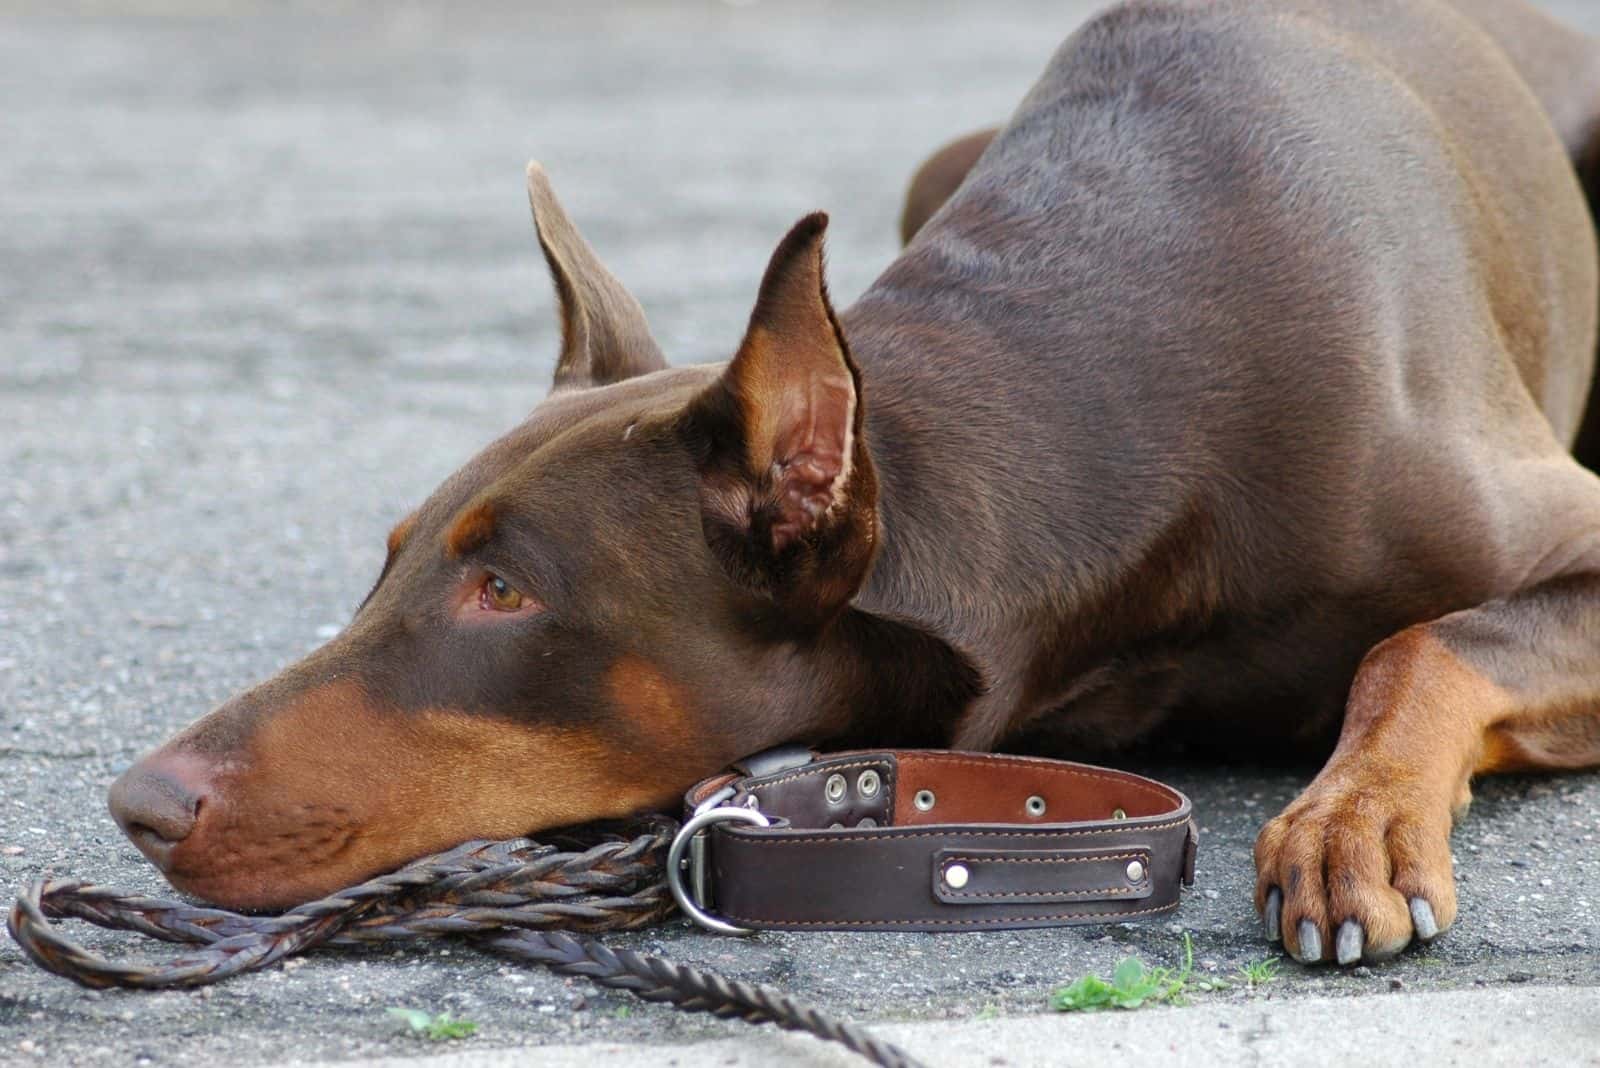 doberman in close up image lying on the cemented floor outdoors